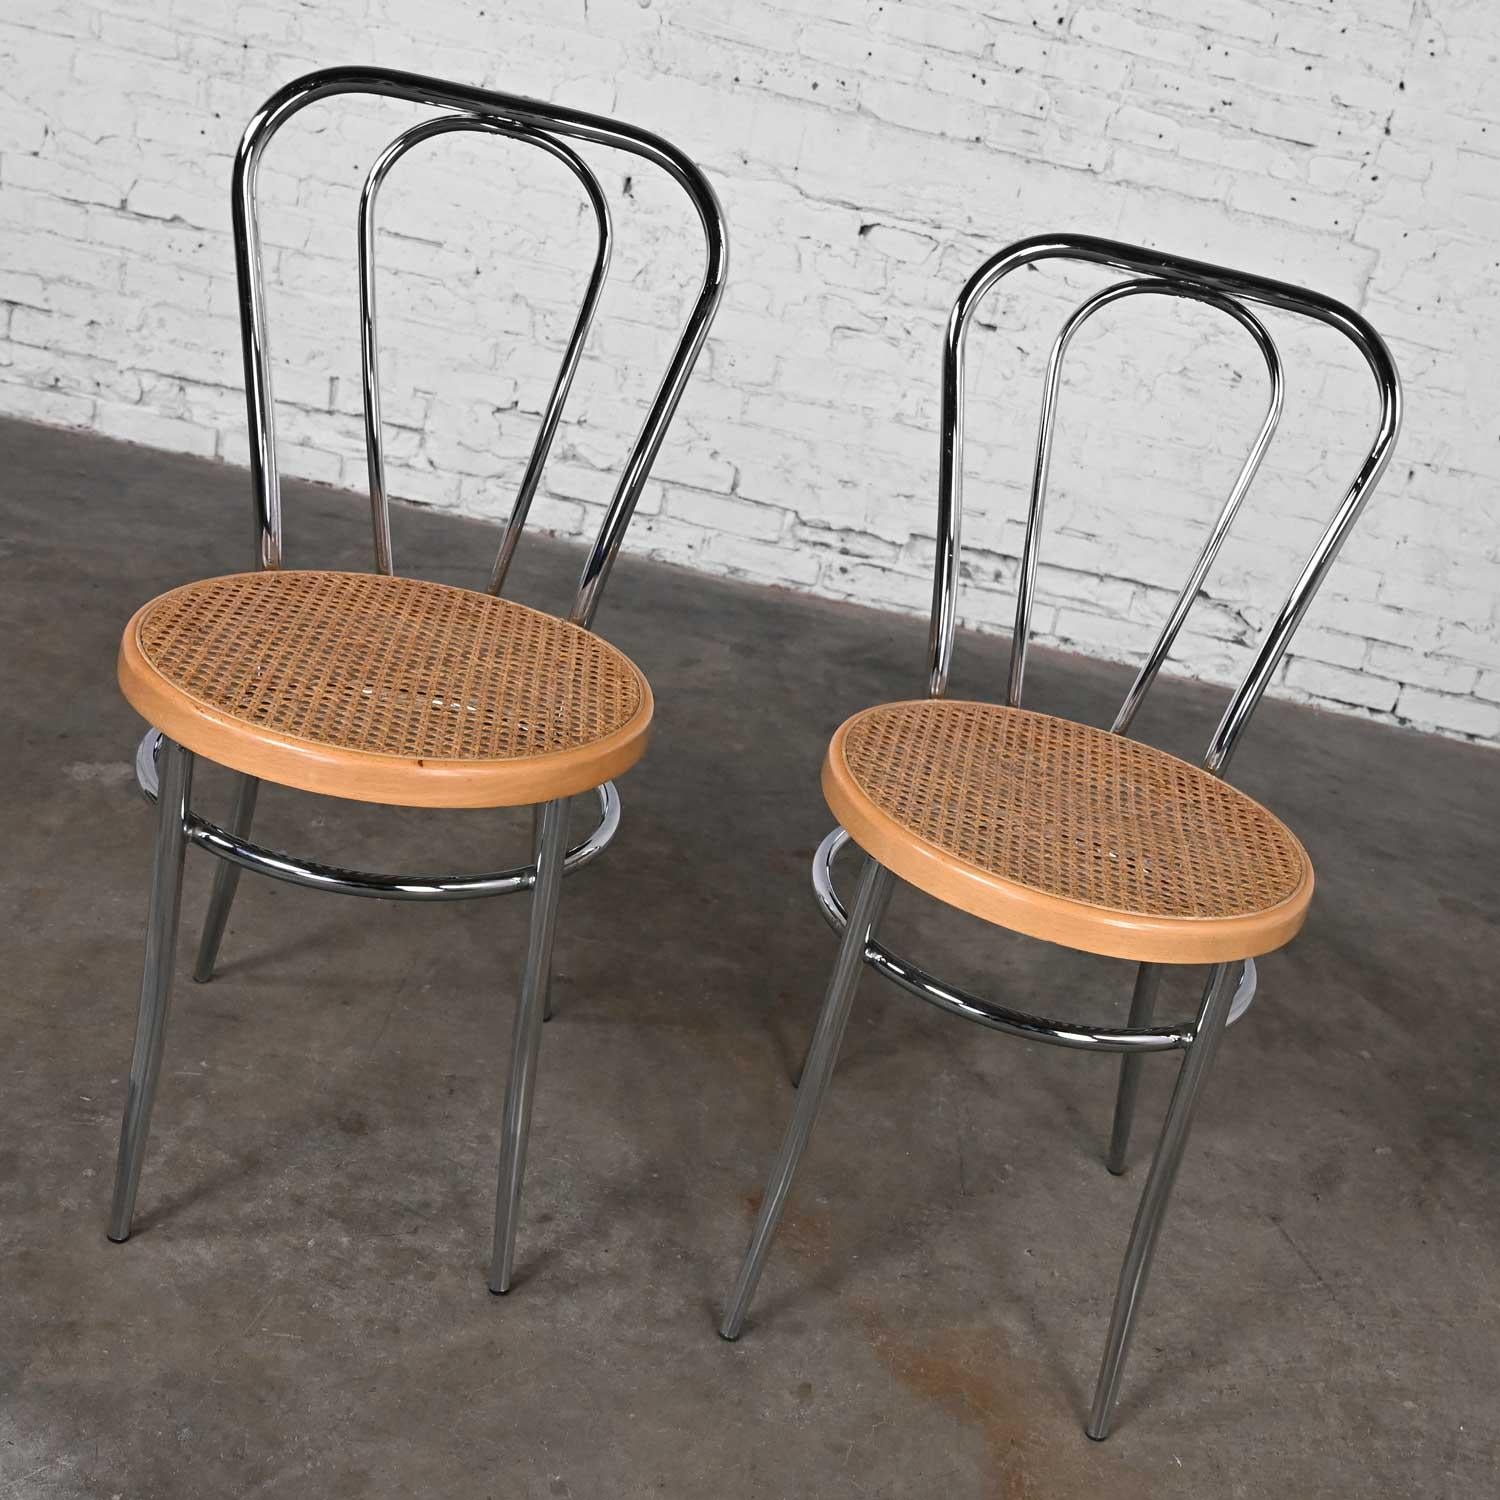 Pair Made Italy Bauhaus Style Bistro Café Chairs Chrome Cane Seat after Thonet en vente 11